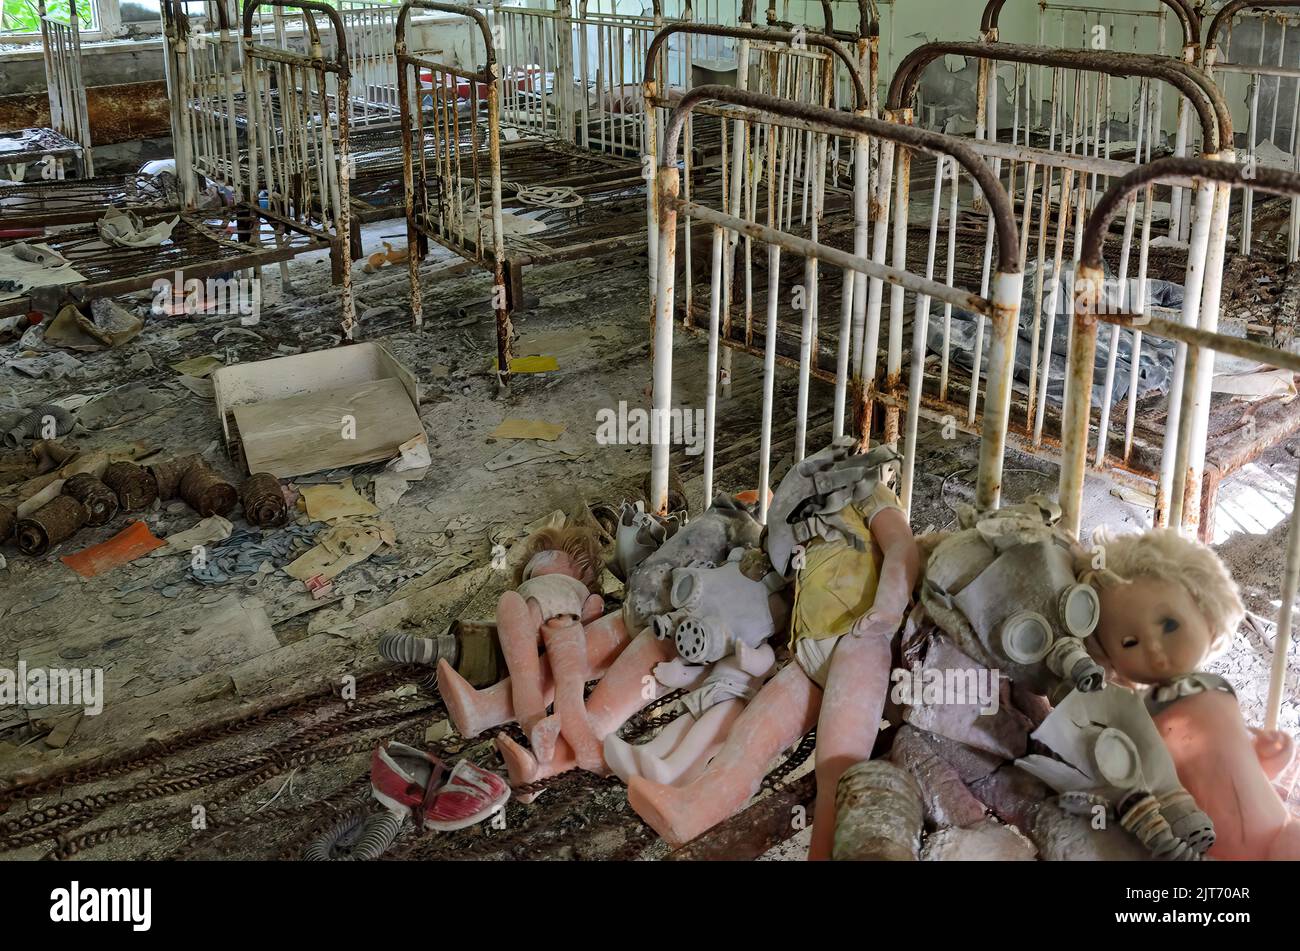 Prypiat dormitory for children with various dolls and toys left on the floor and rusted beds. Chernobyl exclusion zone, Ukraine Stock Photo